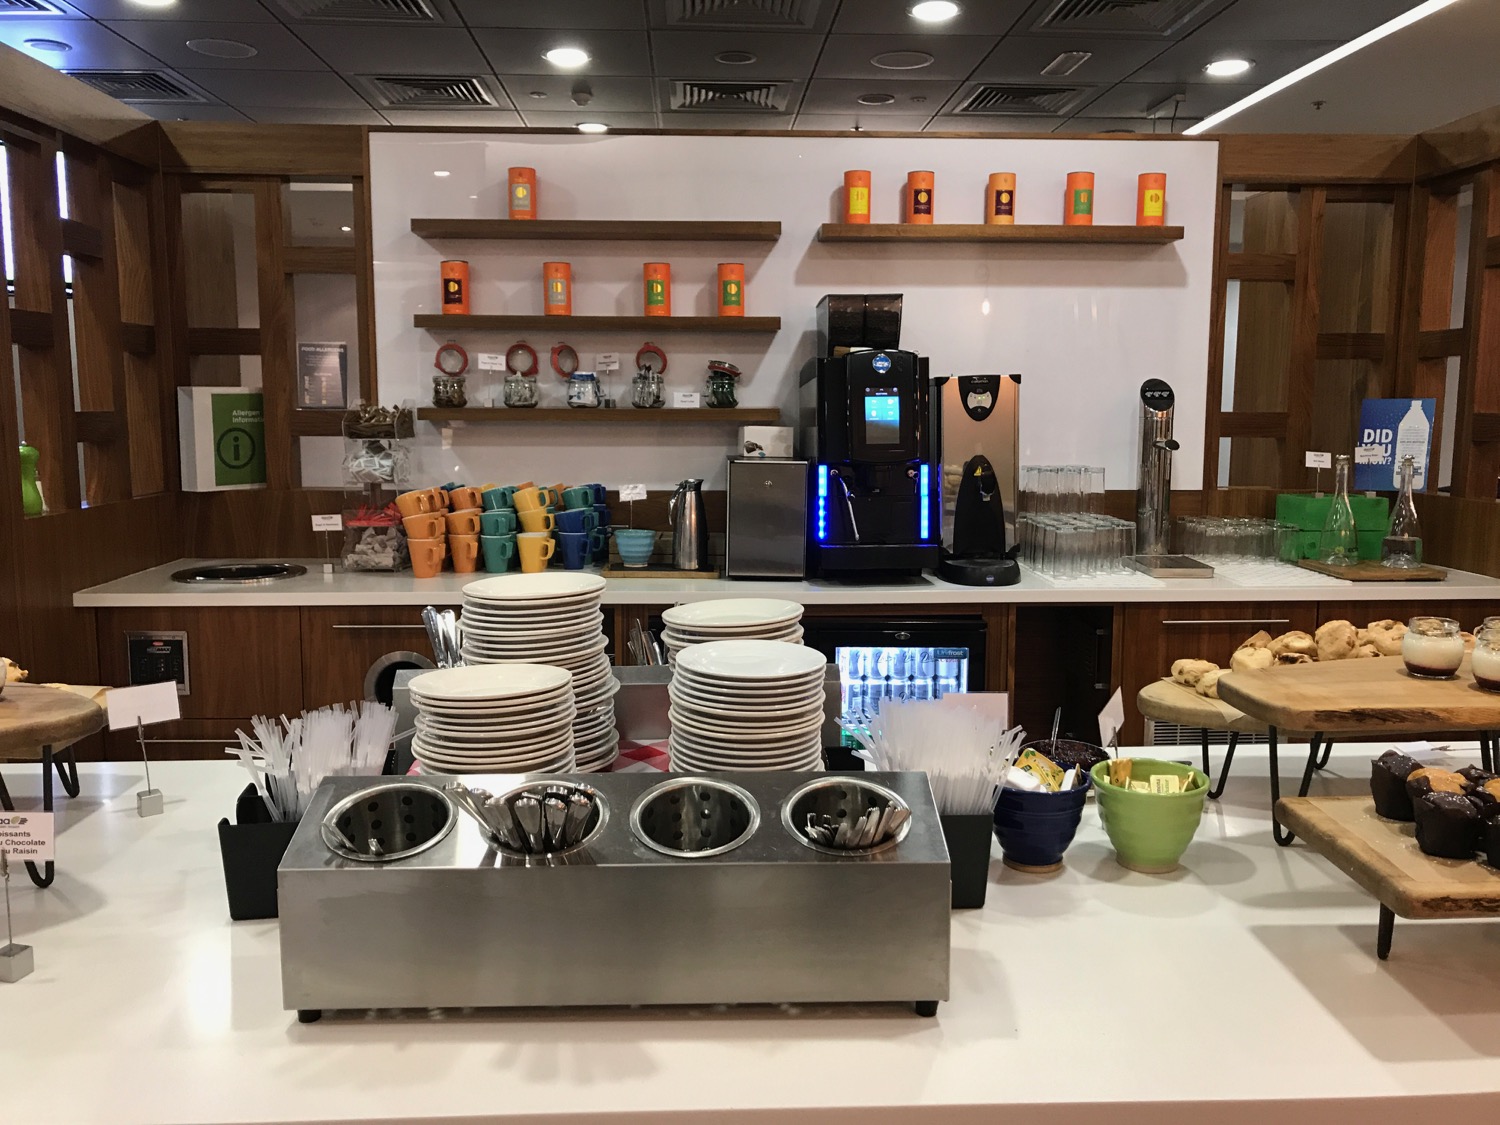 a coffee machine and plates on a counter